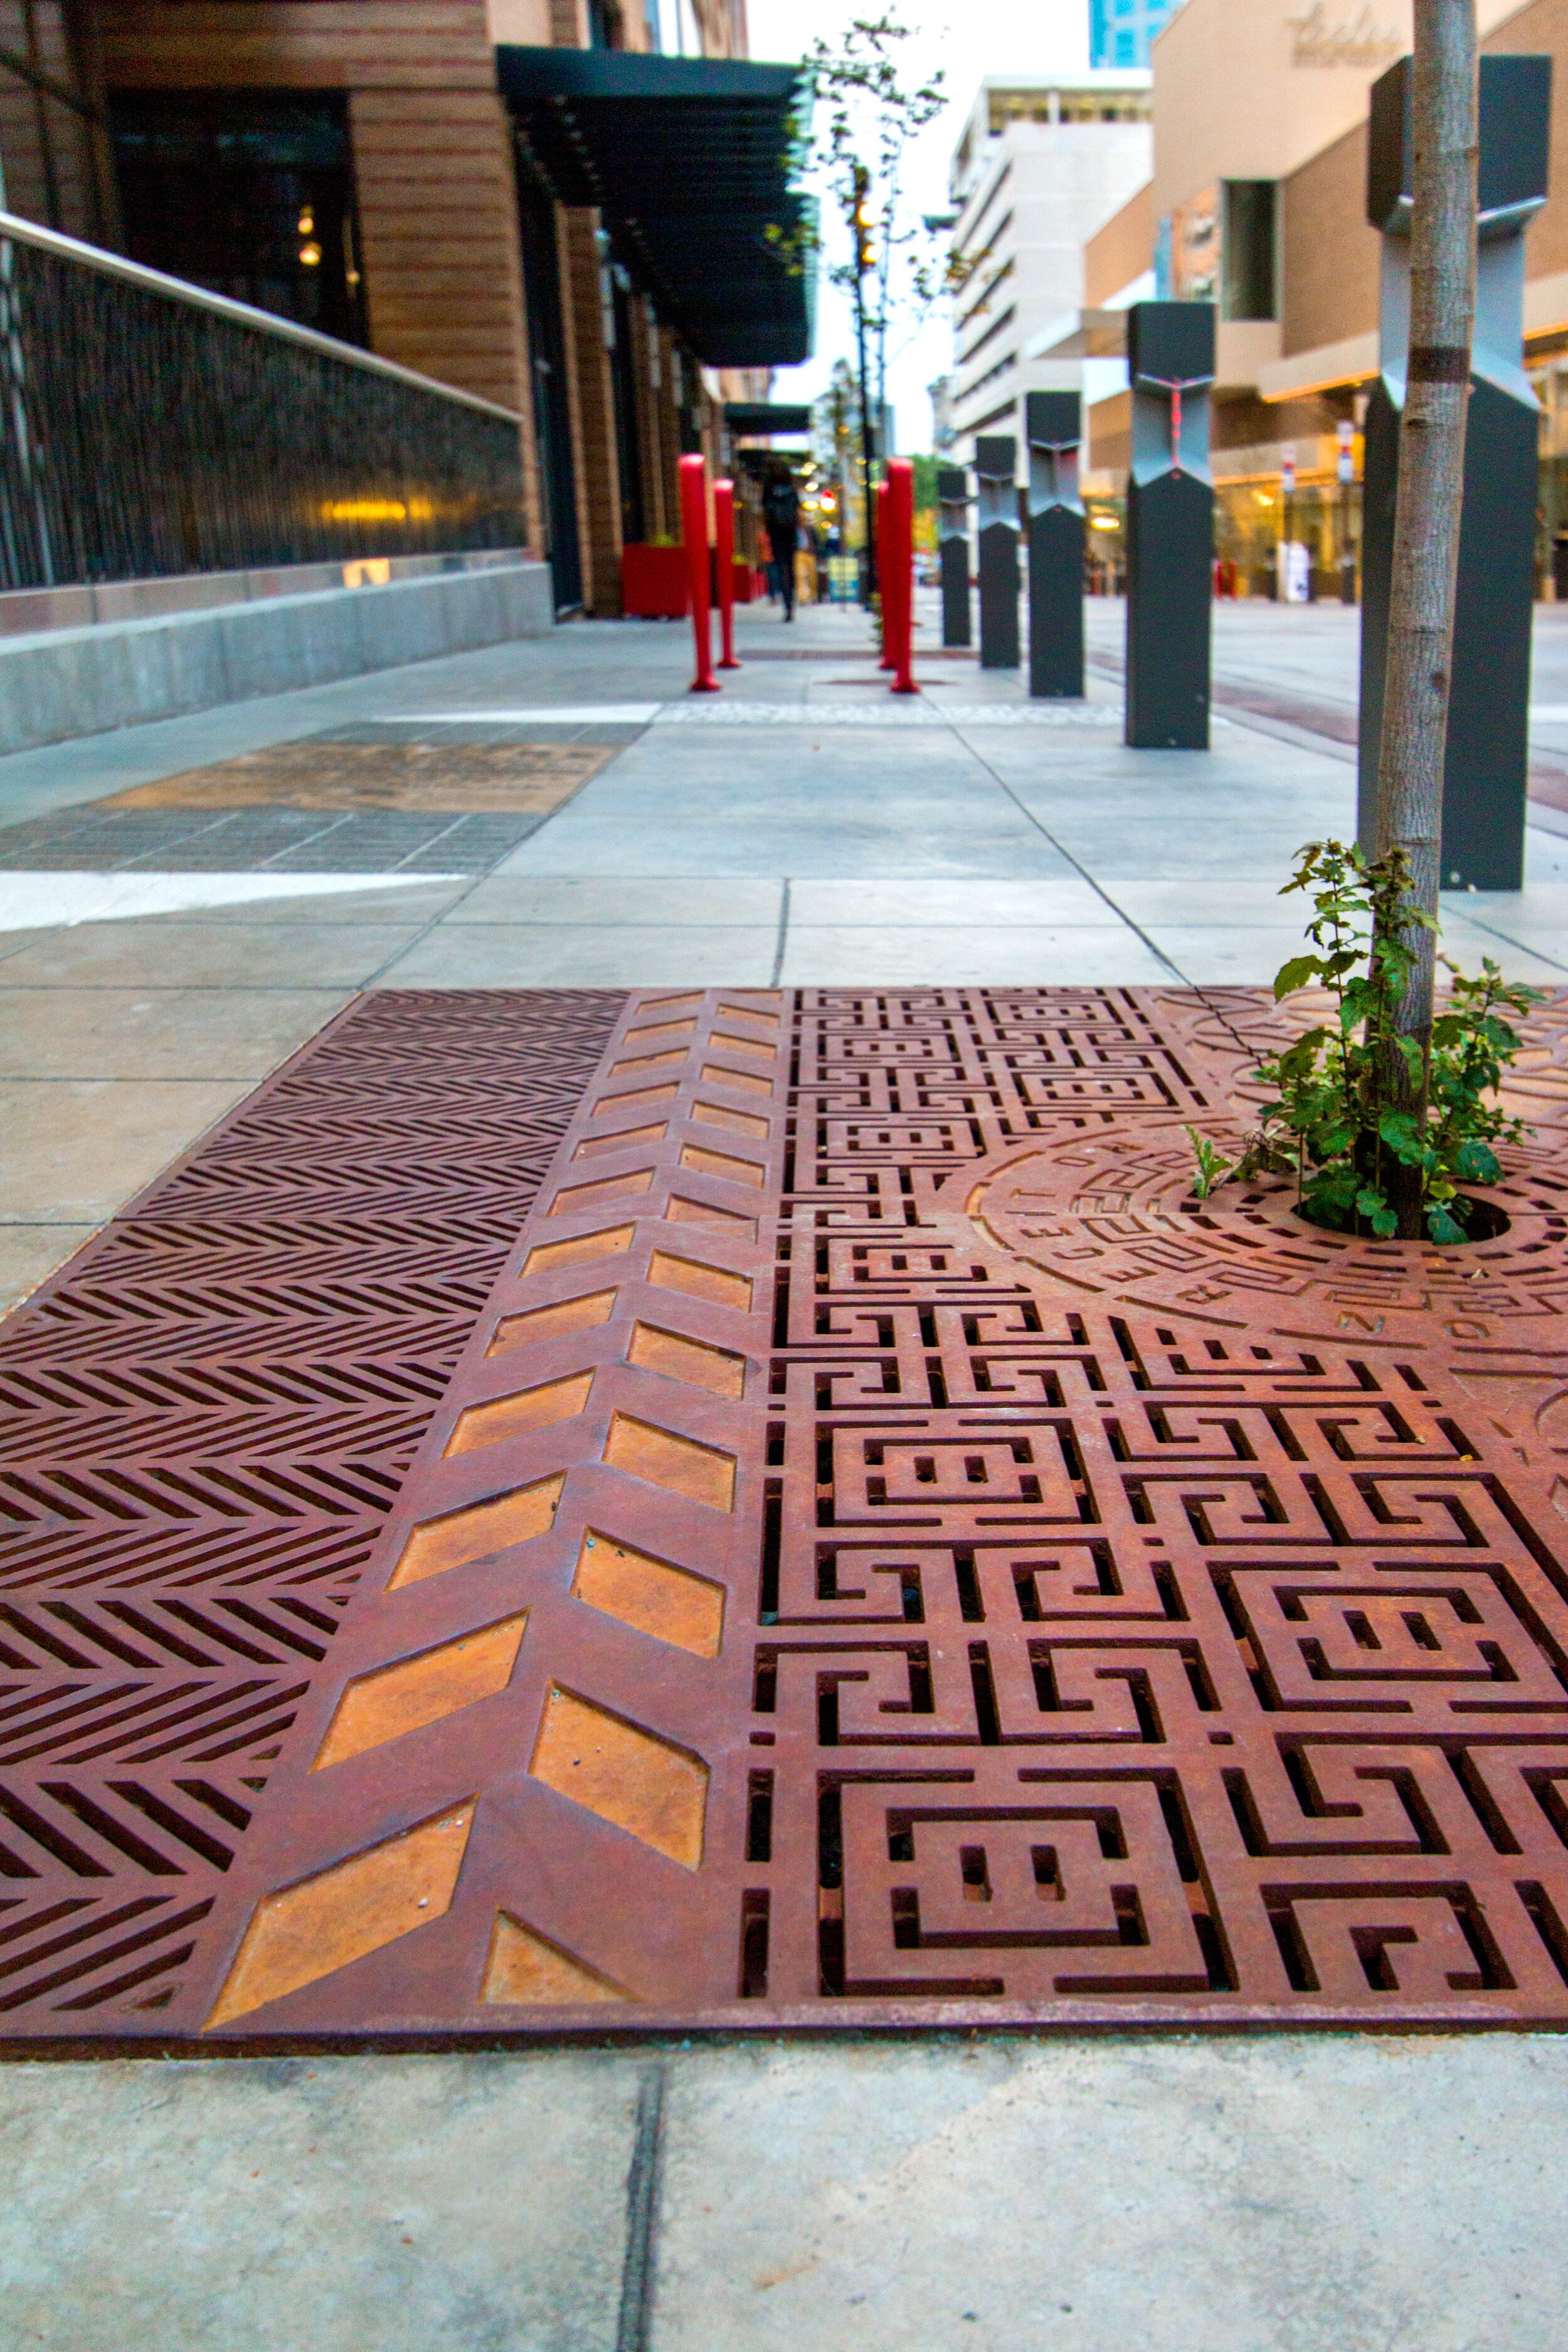  Pedestrian areas seamlessly incorporate unique patterns and materials to encourage a feeling of discovery through the space while providing the opportunity to celebrate the history of this iconic space. 